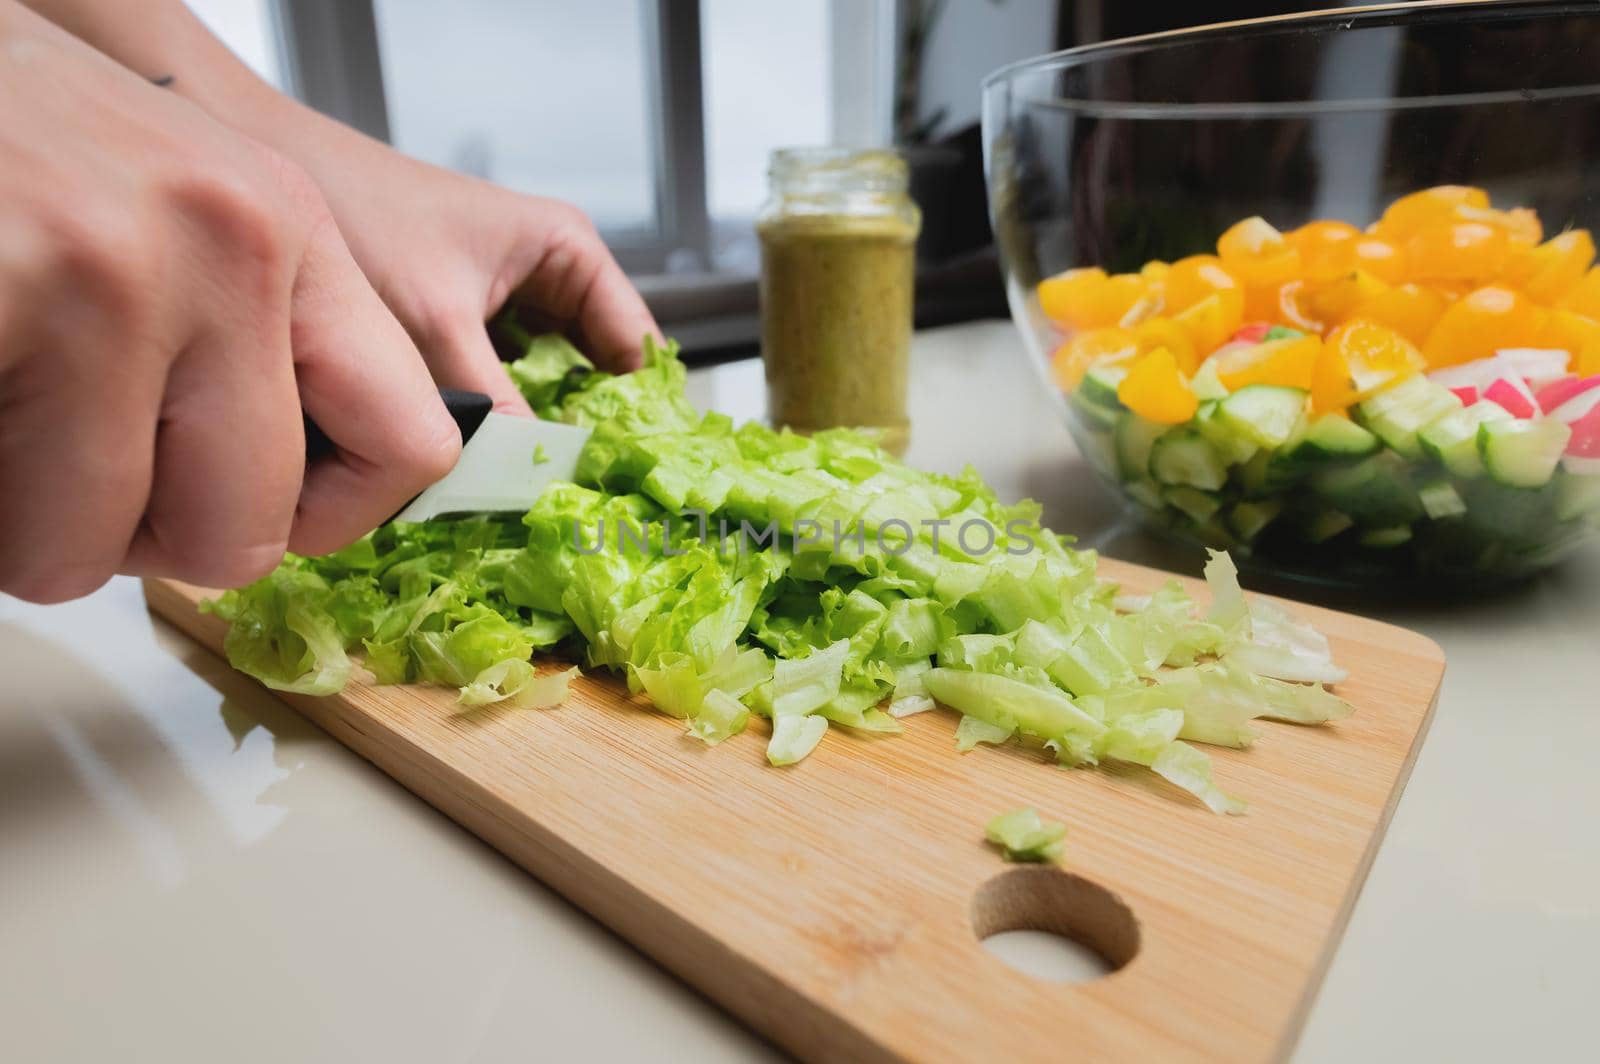 Close-up of a girl's hand cut a salad on a wooden table, a woman prepares a vegetarian salad, healthy food, a knife cuts greens by yanik88